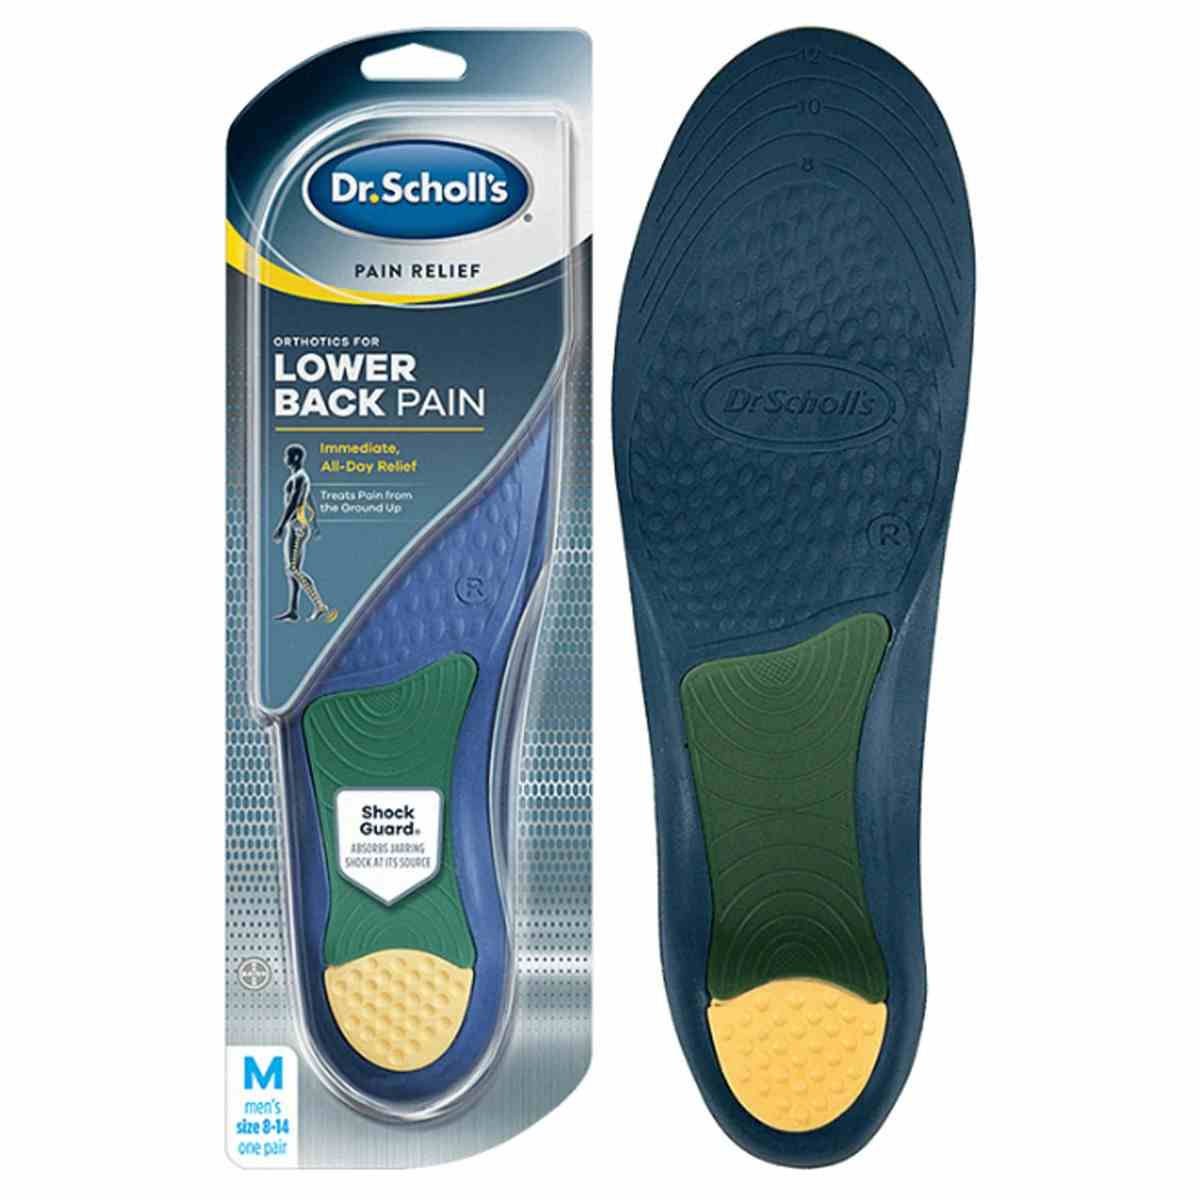 Dr. Scholl's Pain Relief Orthotics for Lower Back Pain, 85286145, Men's (Size 8-12) - Pack of 2